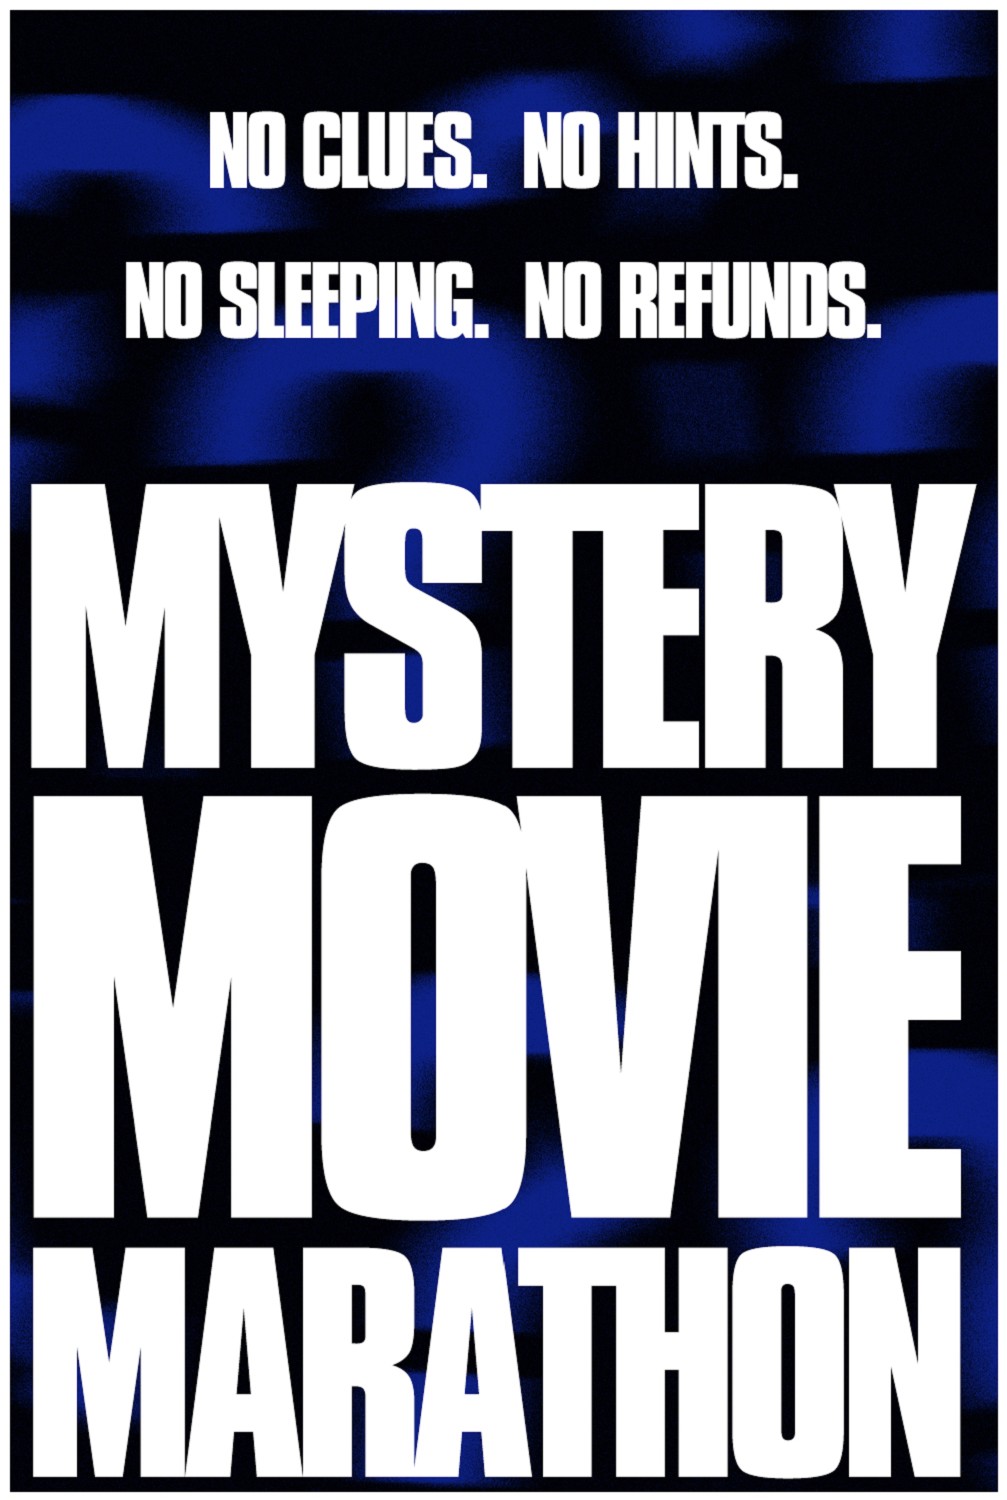 MYSTERY MOVIES - NO CLUES. NO HINTS. NO REFUNDS.